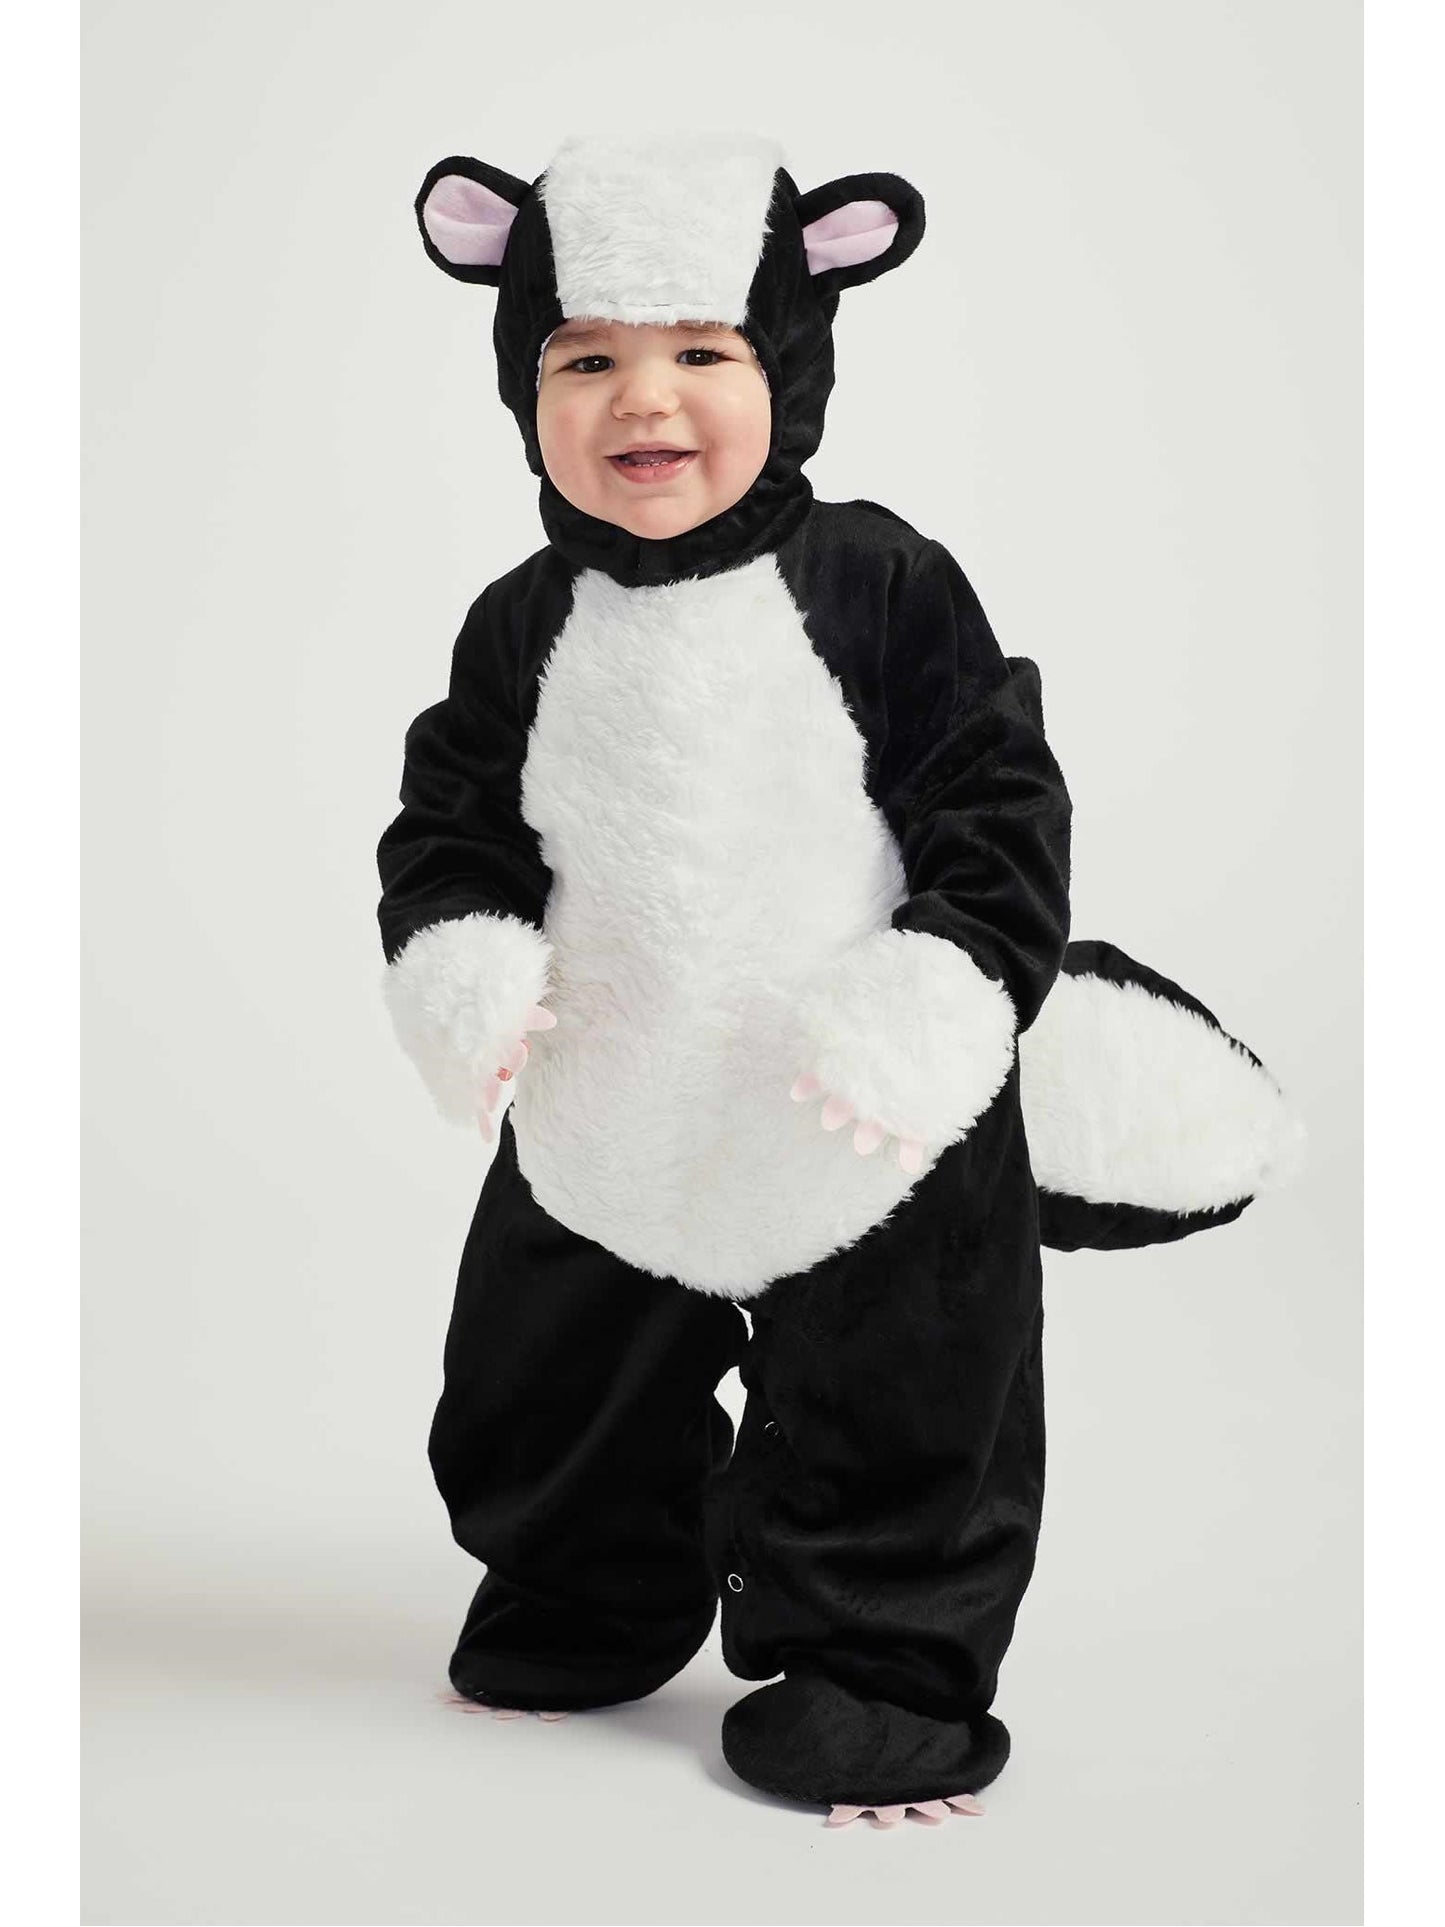 Lil Stinker the Skunk Baby & Toddler Costume